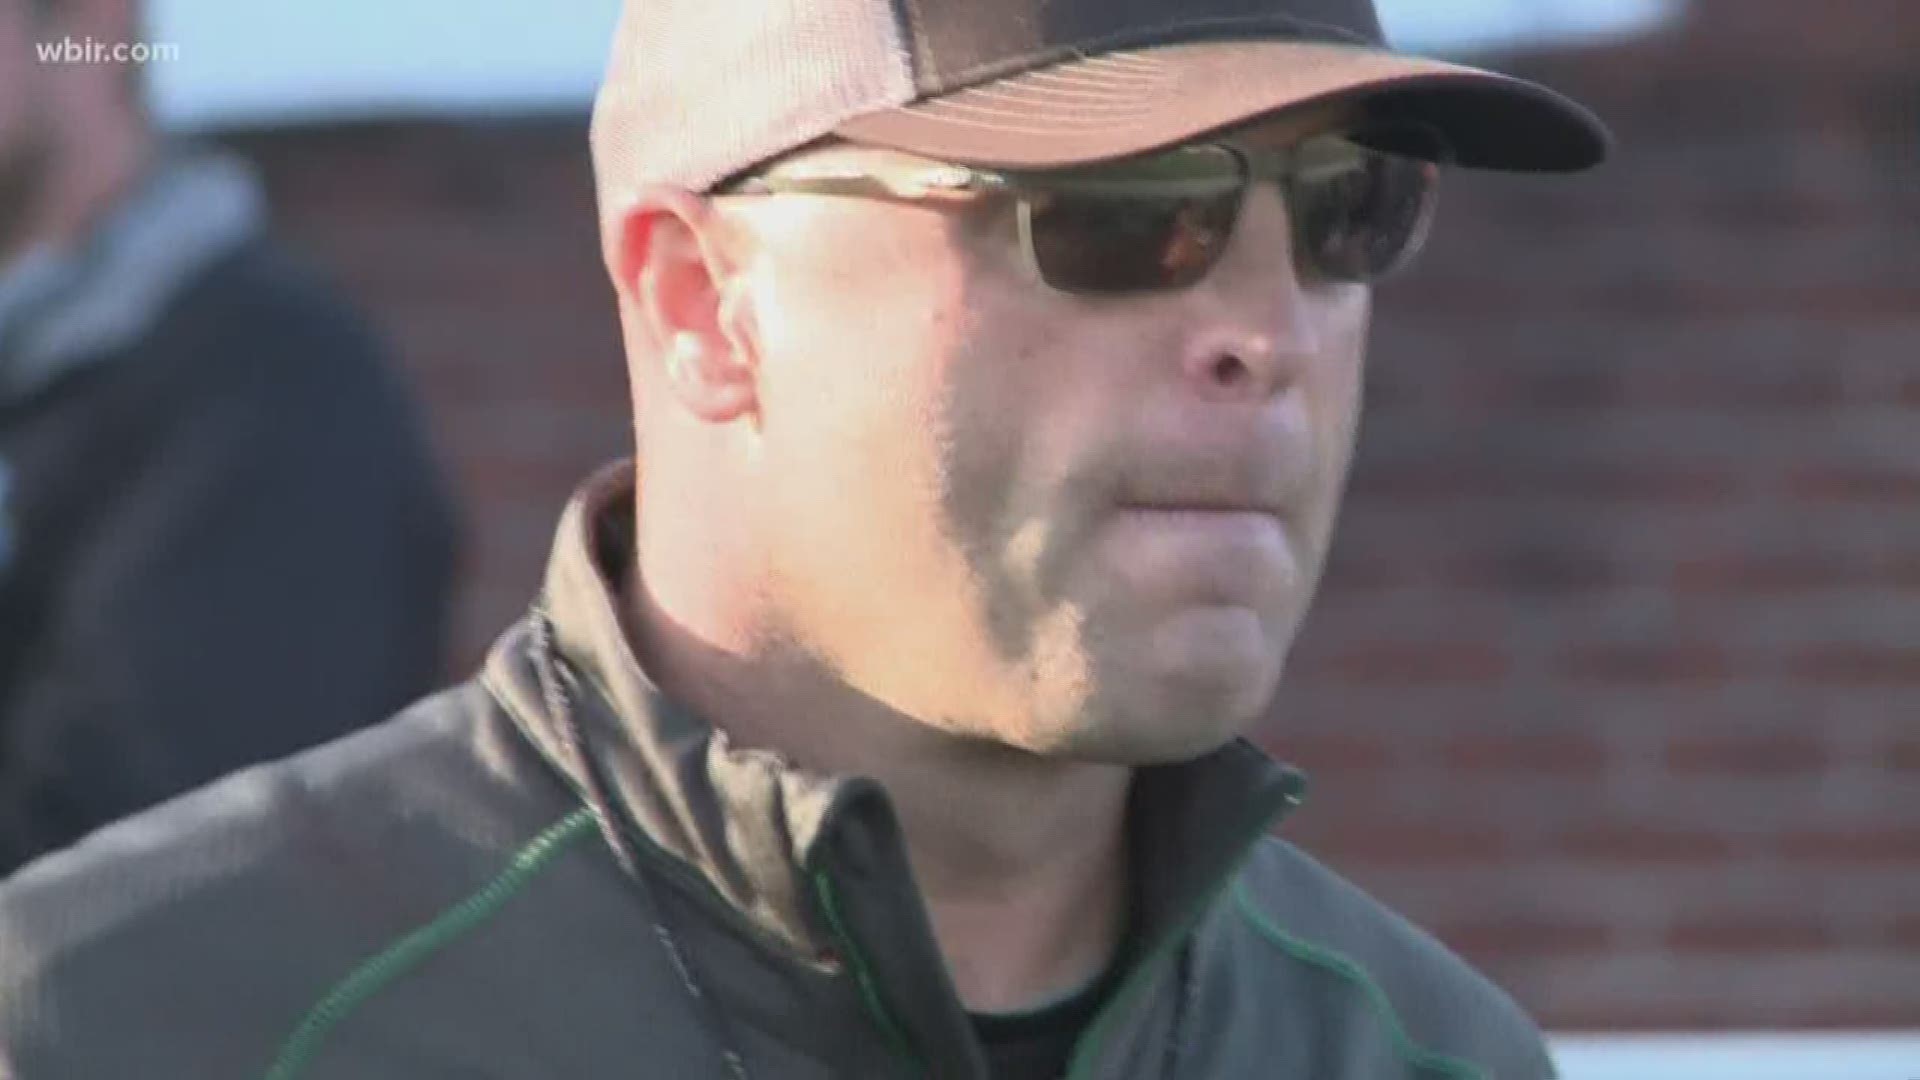 Greeneville head coach Caine Ballard is resigning from his position. He led the Greene Devils to back-to-back state championships the last two years.